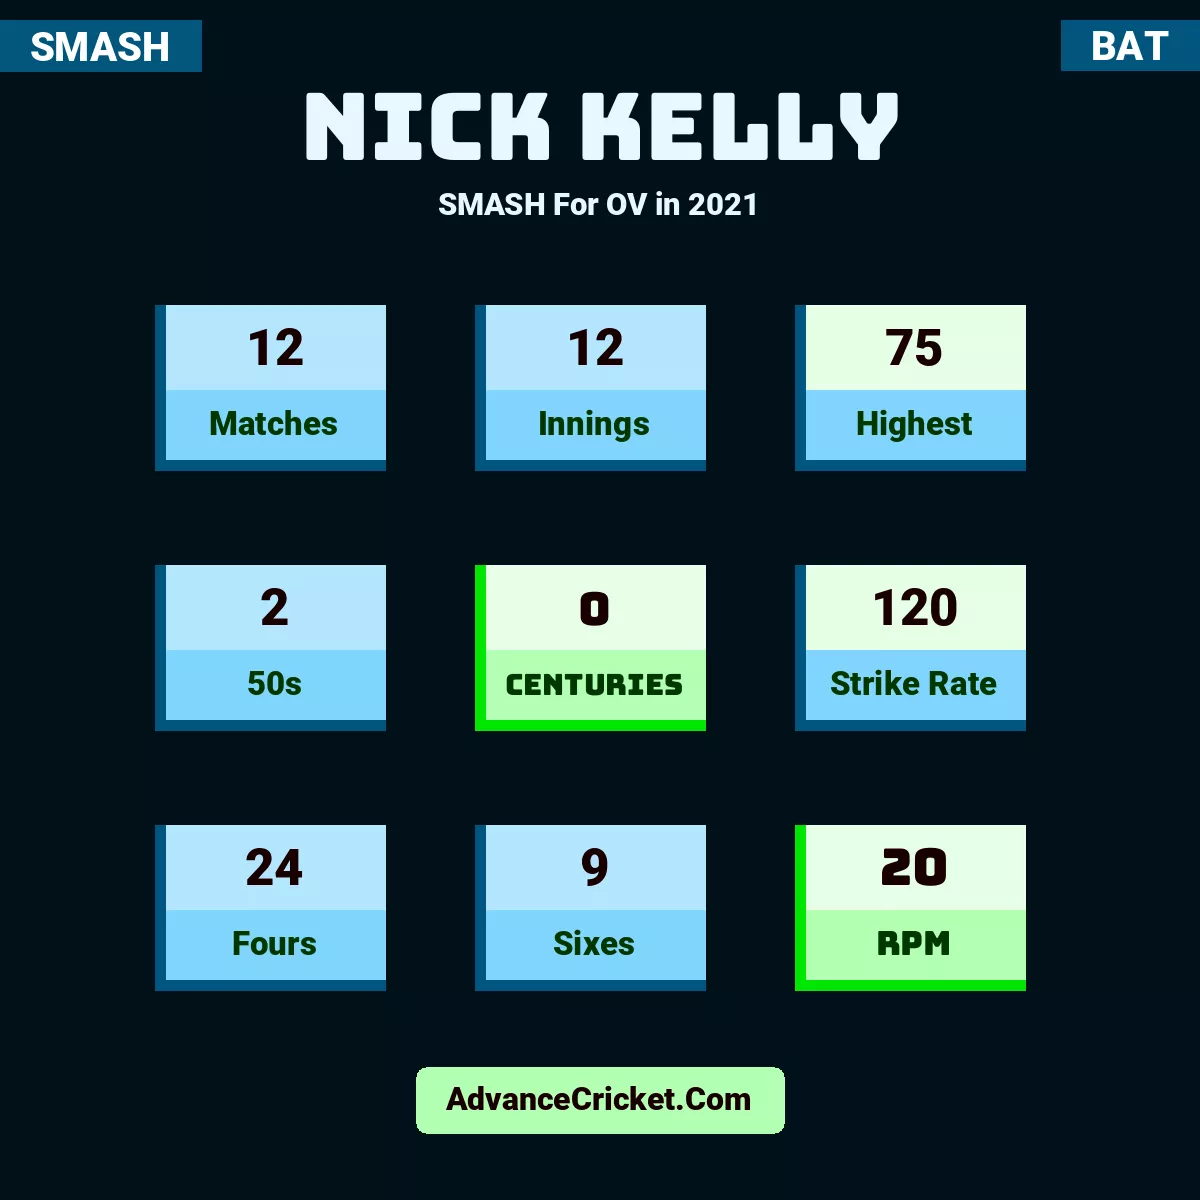 Nick Kelly SMASH  For OV in 2021, Nick Kelly played 12 matches, scored 75 runs as highest, 2 half-centuries, and 0 centuries, with a strike rate of 120. N.Kelly hit 24 fours and 9 sixes, with an RPM of 20.